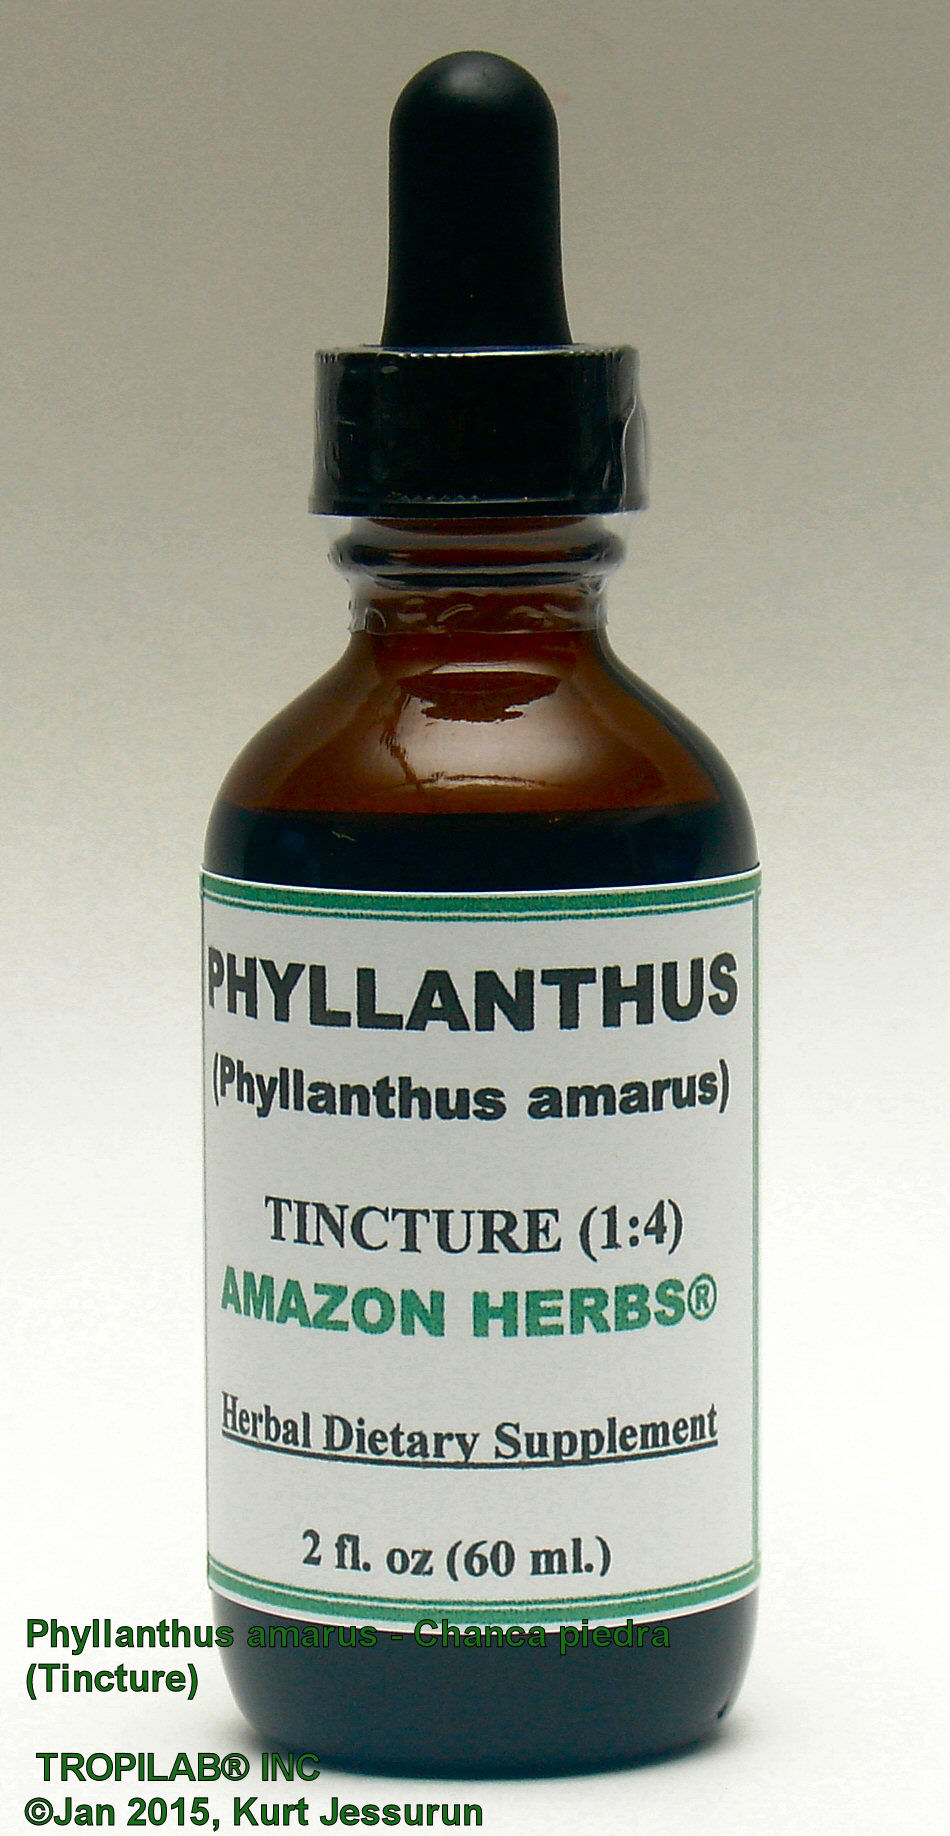 Phyllanthus amarus, Chanca piedra herbal tincture - Tropilab; is used extensively for liver, kidney and gall bladder
 function. Also used against diabetes, frequent menstruation, gonorrhea, gout and jaundice.